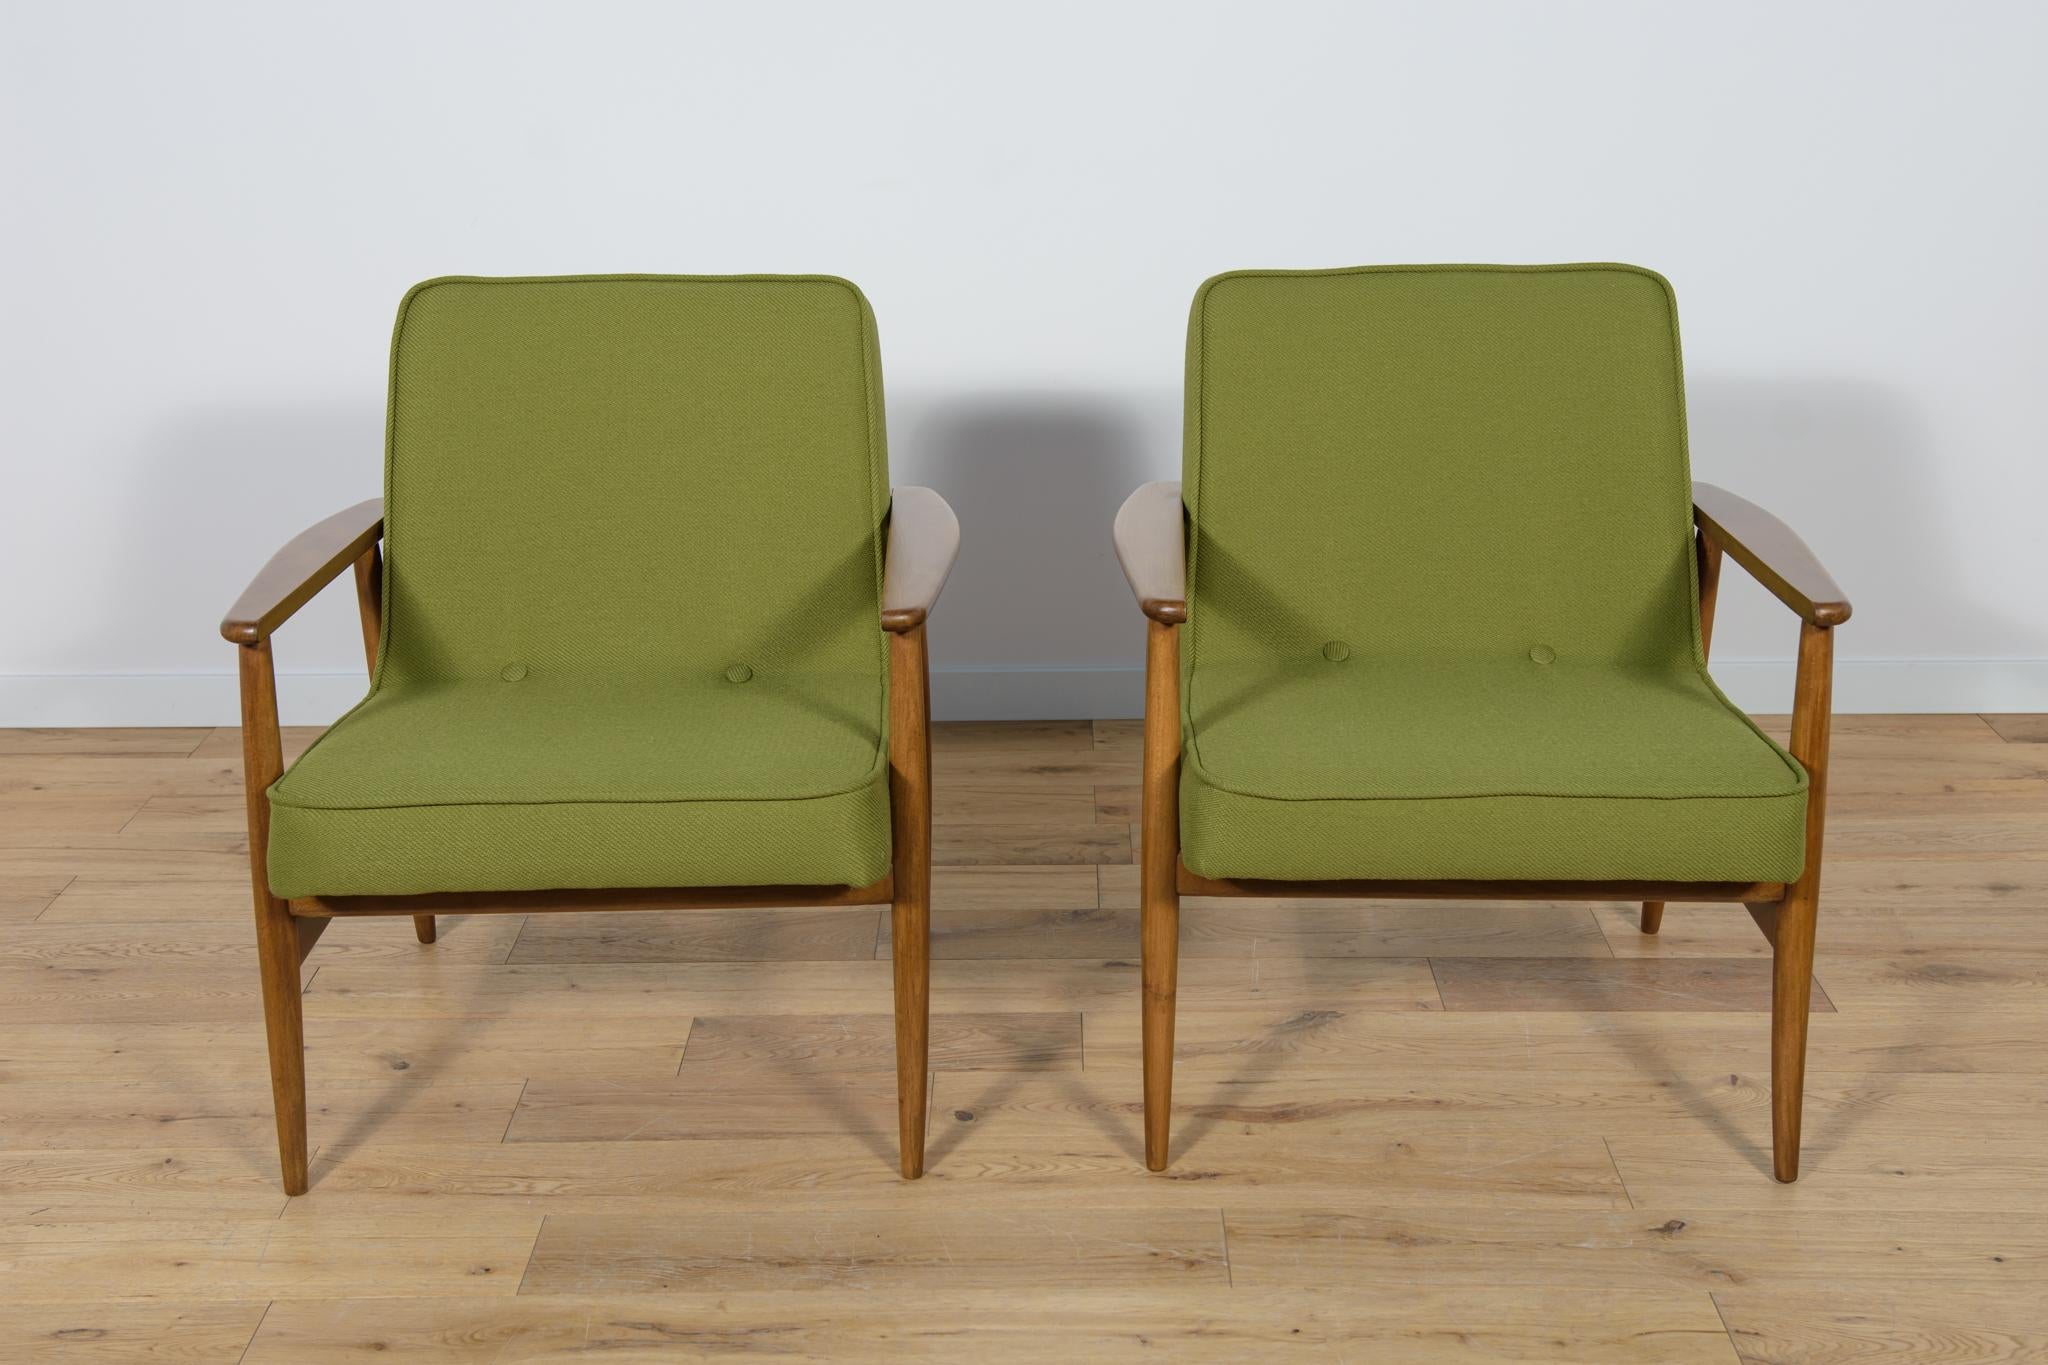 A pair of Polish Type 300-192 armchairs designed by Juliusz Kędziorek for Gościcińska Fabryka Mebli in the early 1970s.
The armchairs have undergone professional carpentry and upholstery renovation. The beech wood was cleaned of the old surface,